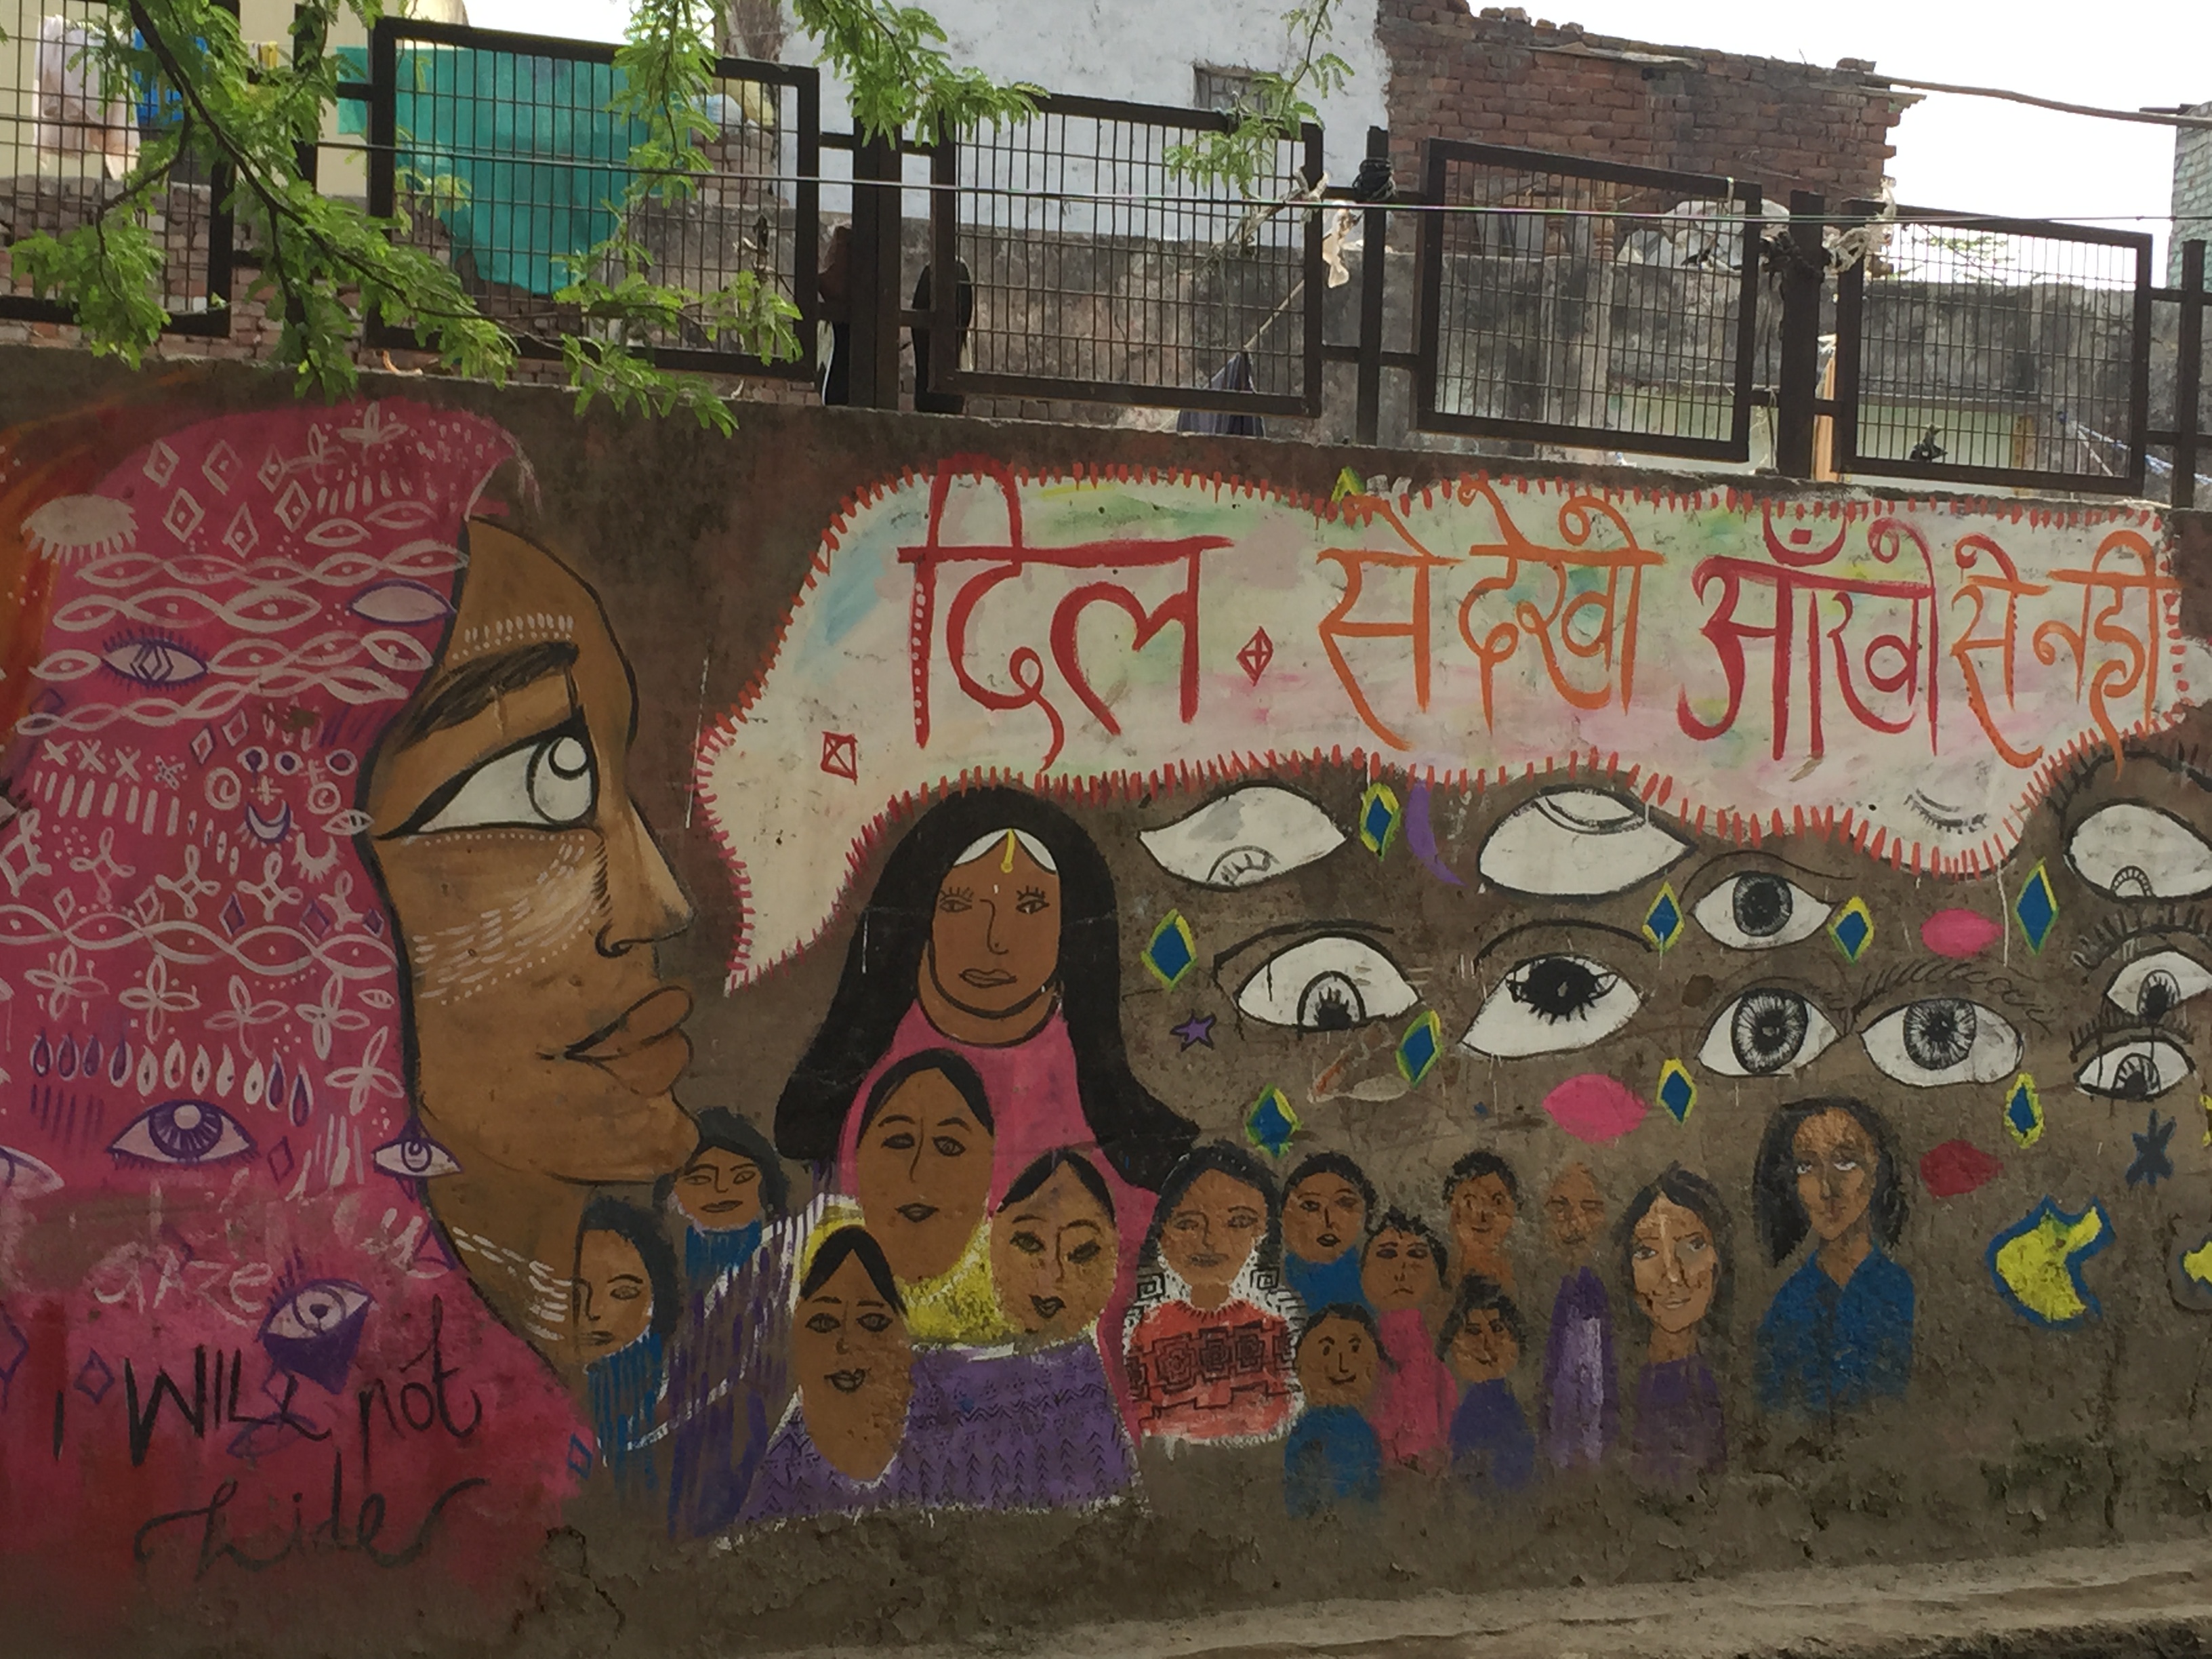 A Safecity mural, depicting images of women staring at the viewer. "I will not hide." is seen on the left.